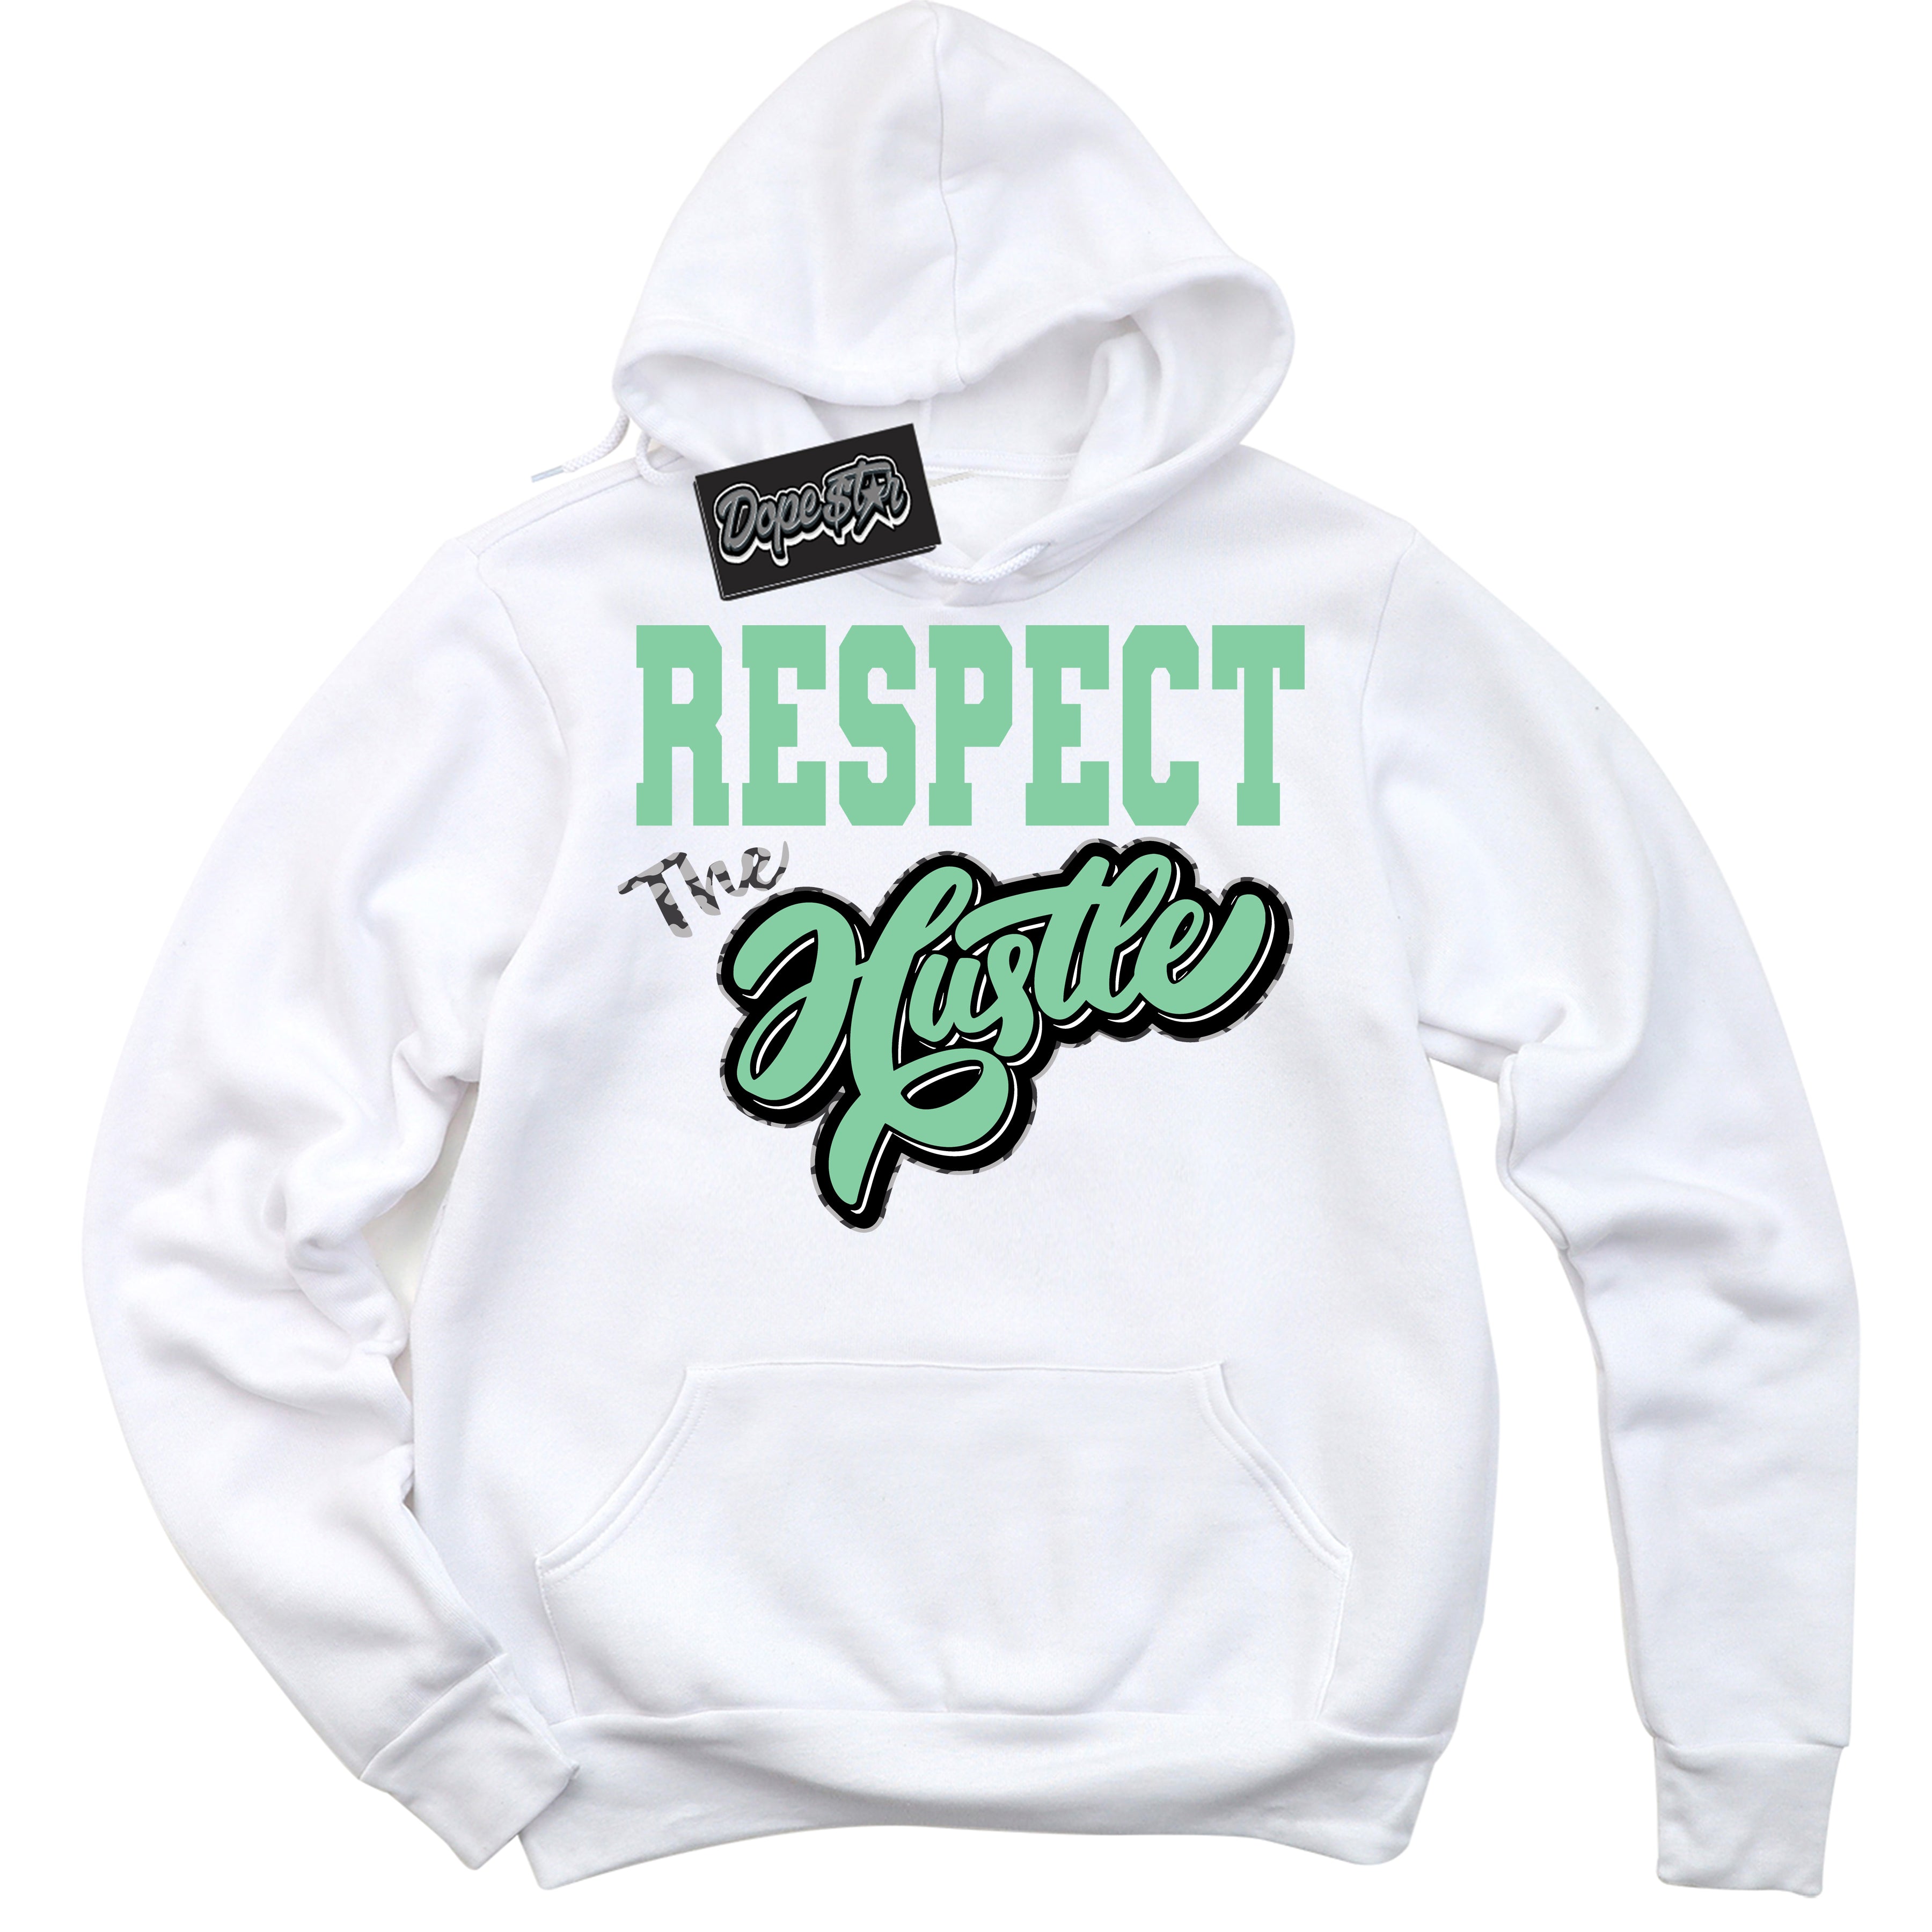 Cool White Graphic DopeStar Hoodie with “ Respect The Hustle “ print, that perfectly matches Green Glow 3s sneakers